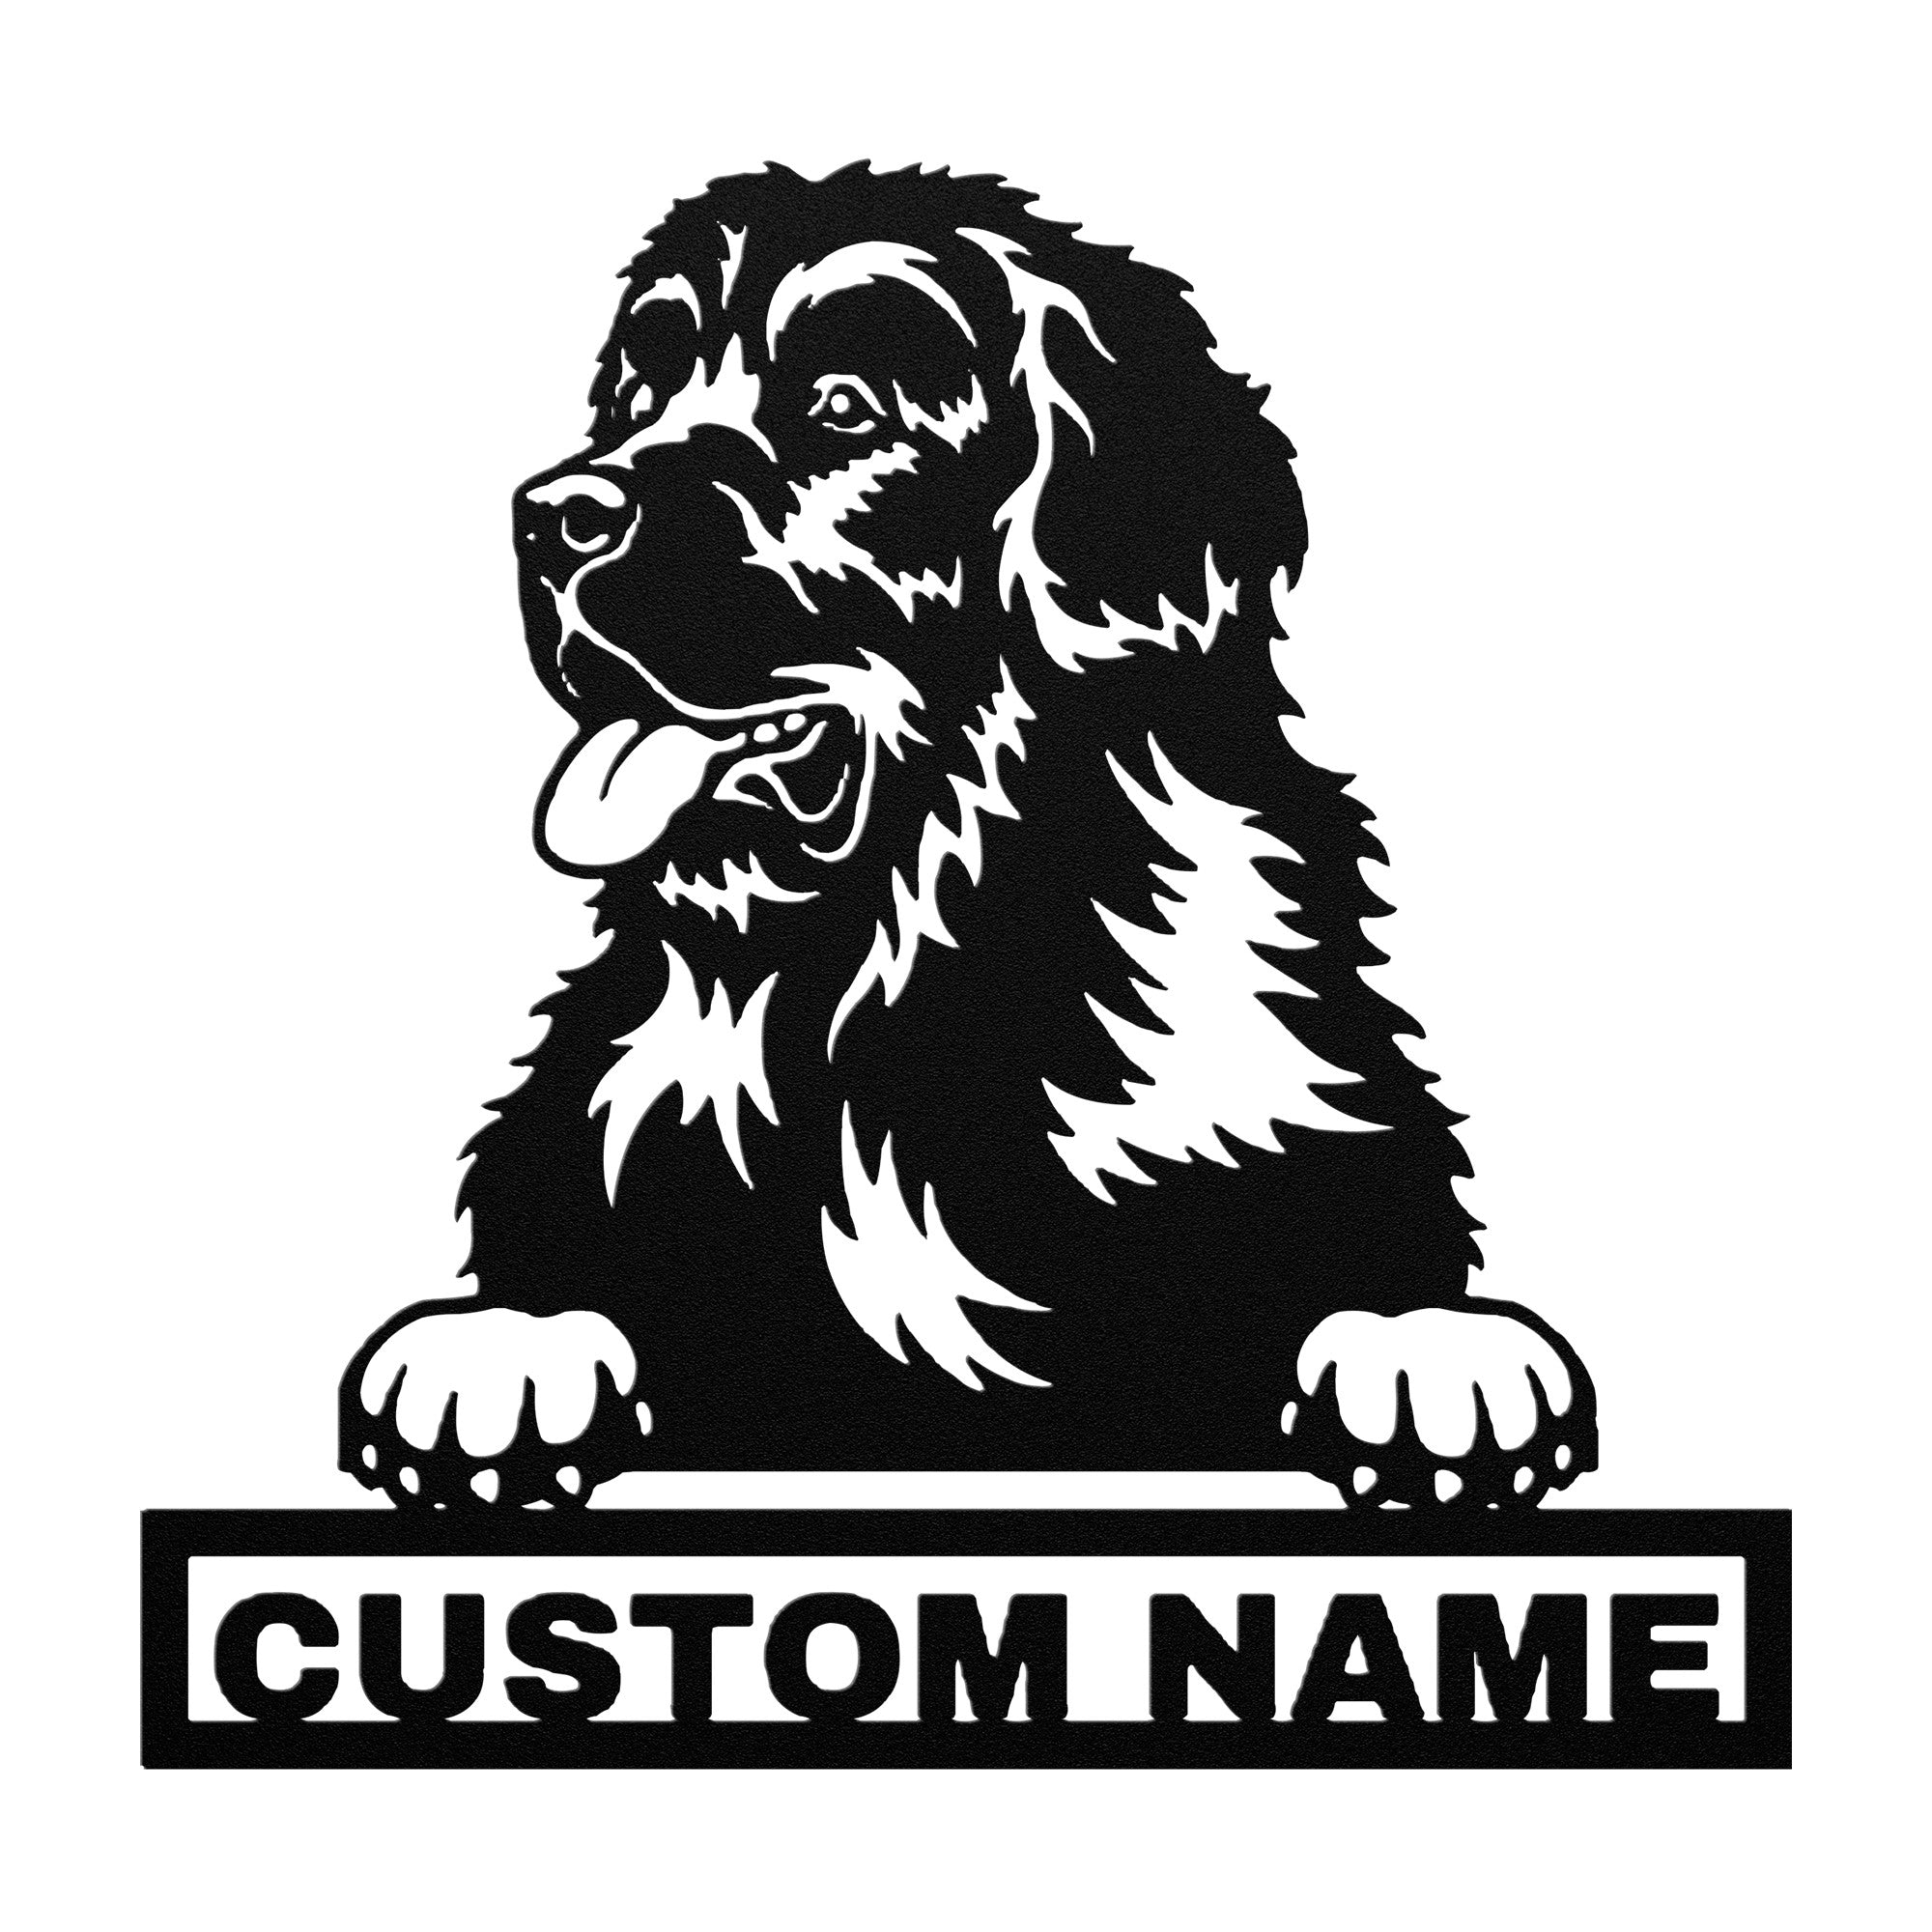 Personalized Newfoundland Dog Metal Sign - Newfoundland Custom Name Wall Decor, Metal Signs Customized Outdoor Indoor, Wall Art Gift For Newfoundland Dog Lover